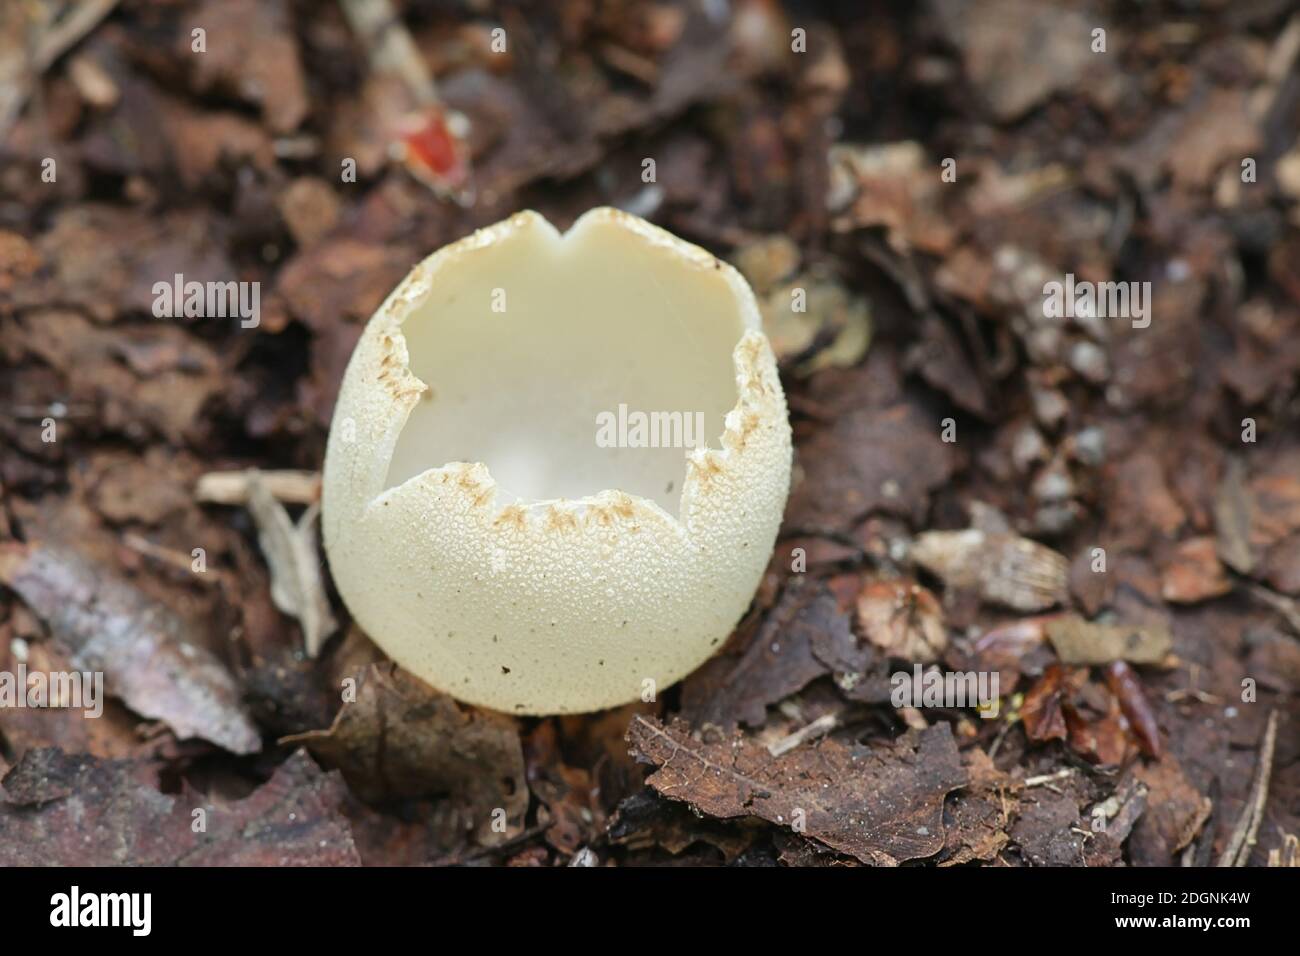 Tarzetta catinus, also called Galactinia pustulata or Peziza pustulata, commonly known as Greater Toothed Cup fungus, wild mushroom from Finlnad Stock Photo